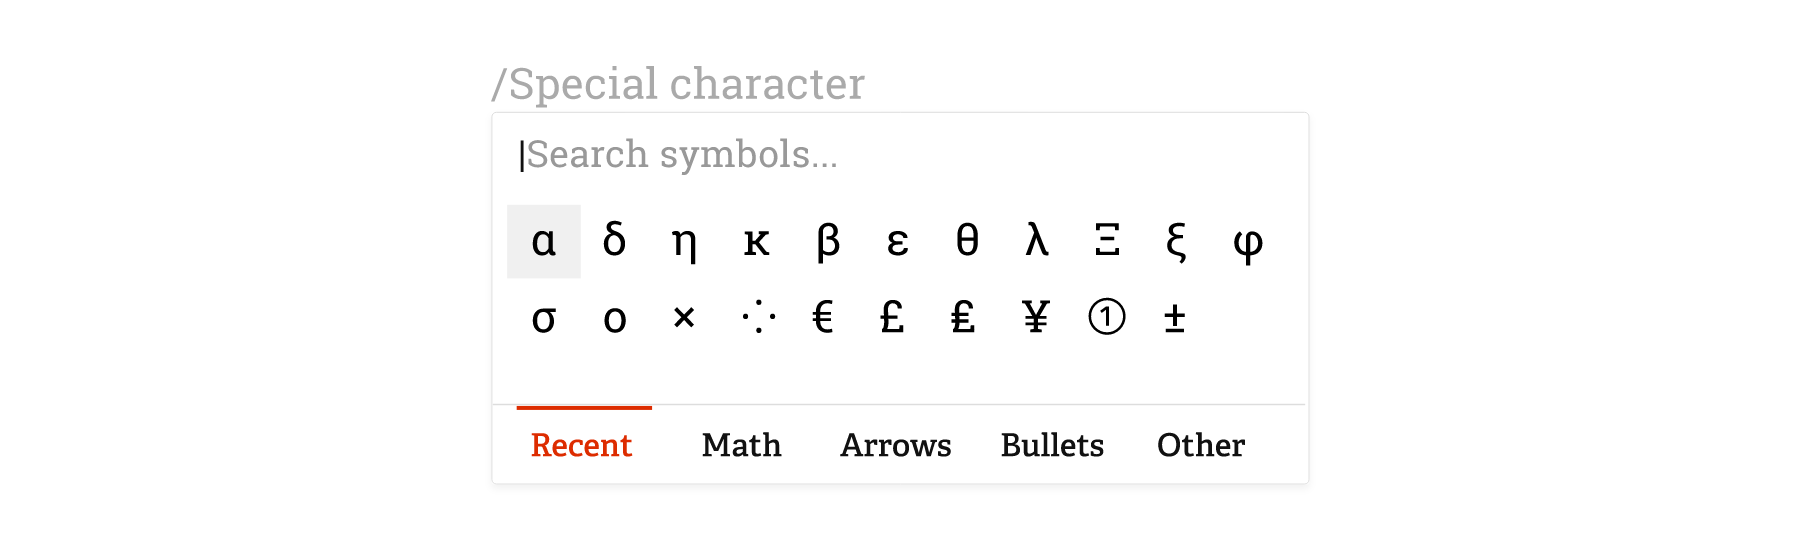 Special character lookup